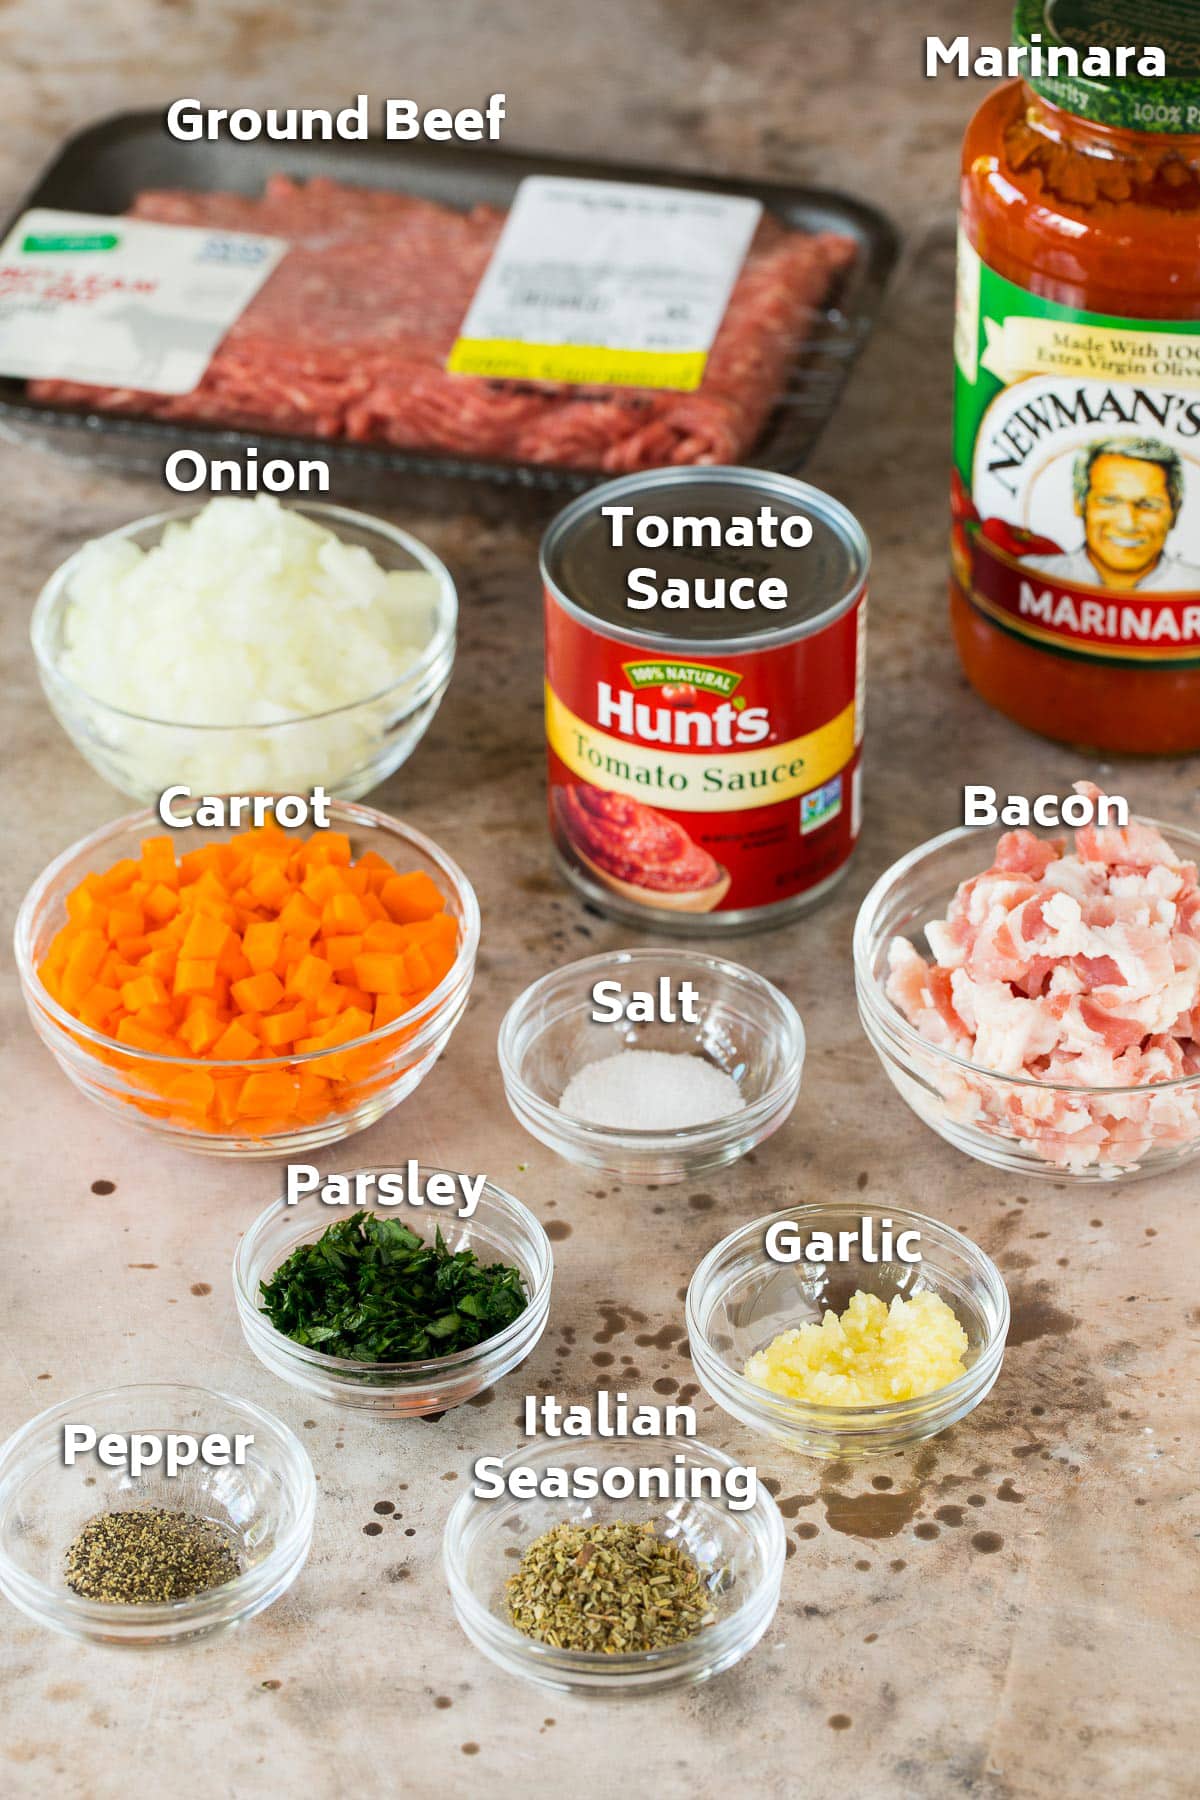 Ingredients including ground beef, bacon, vegetables and marinara sauce.